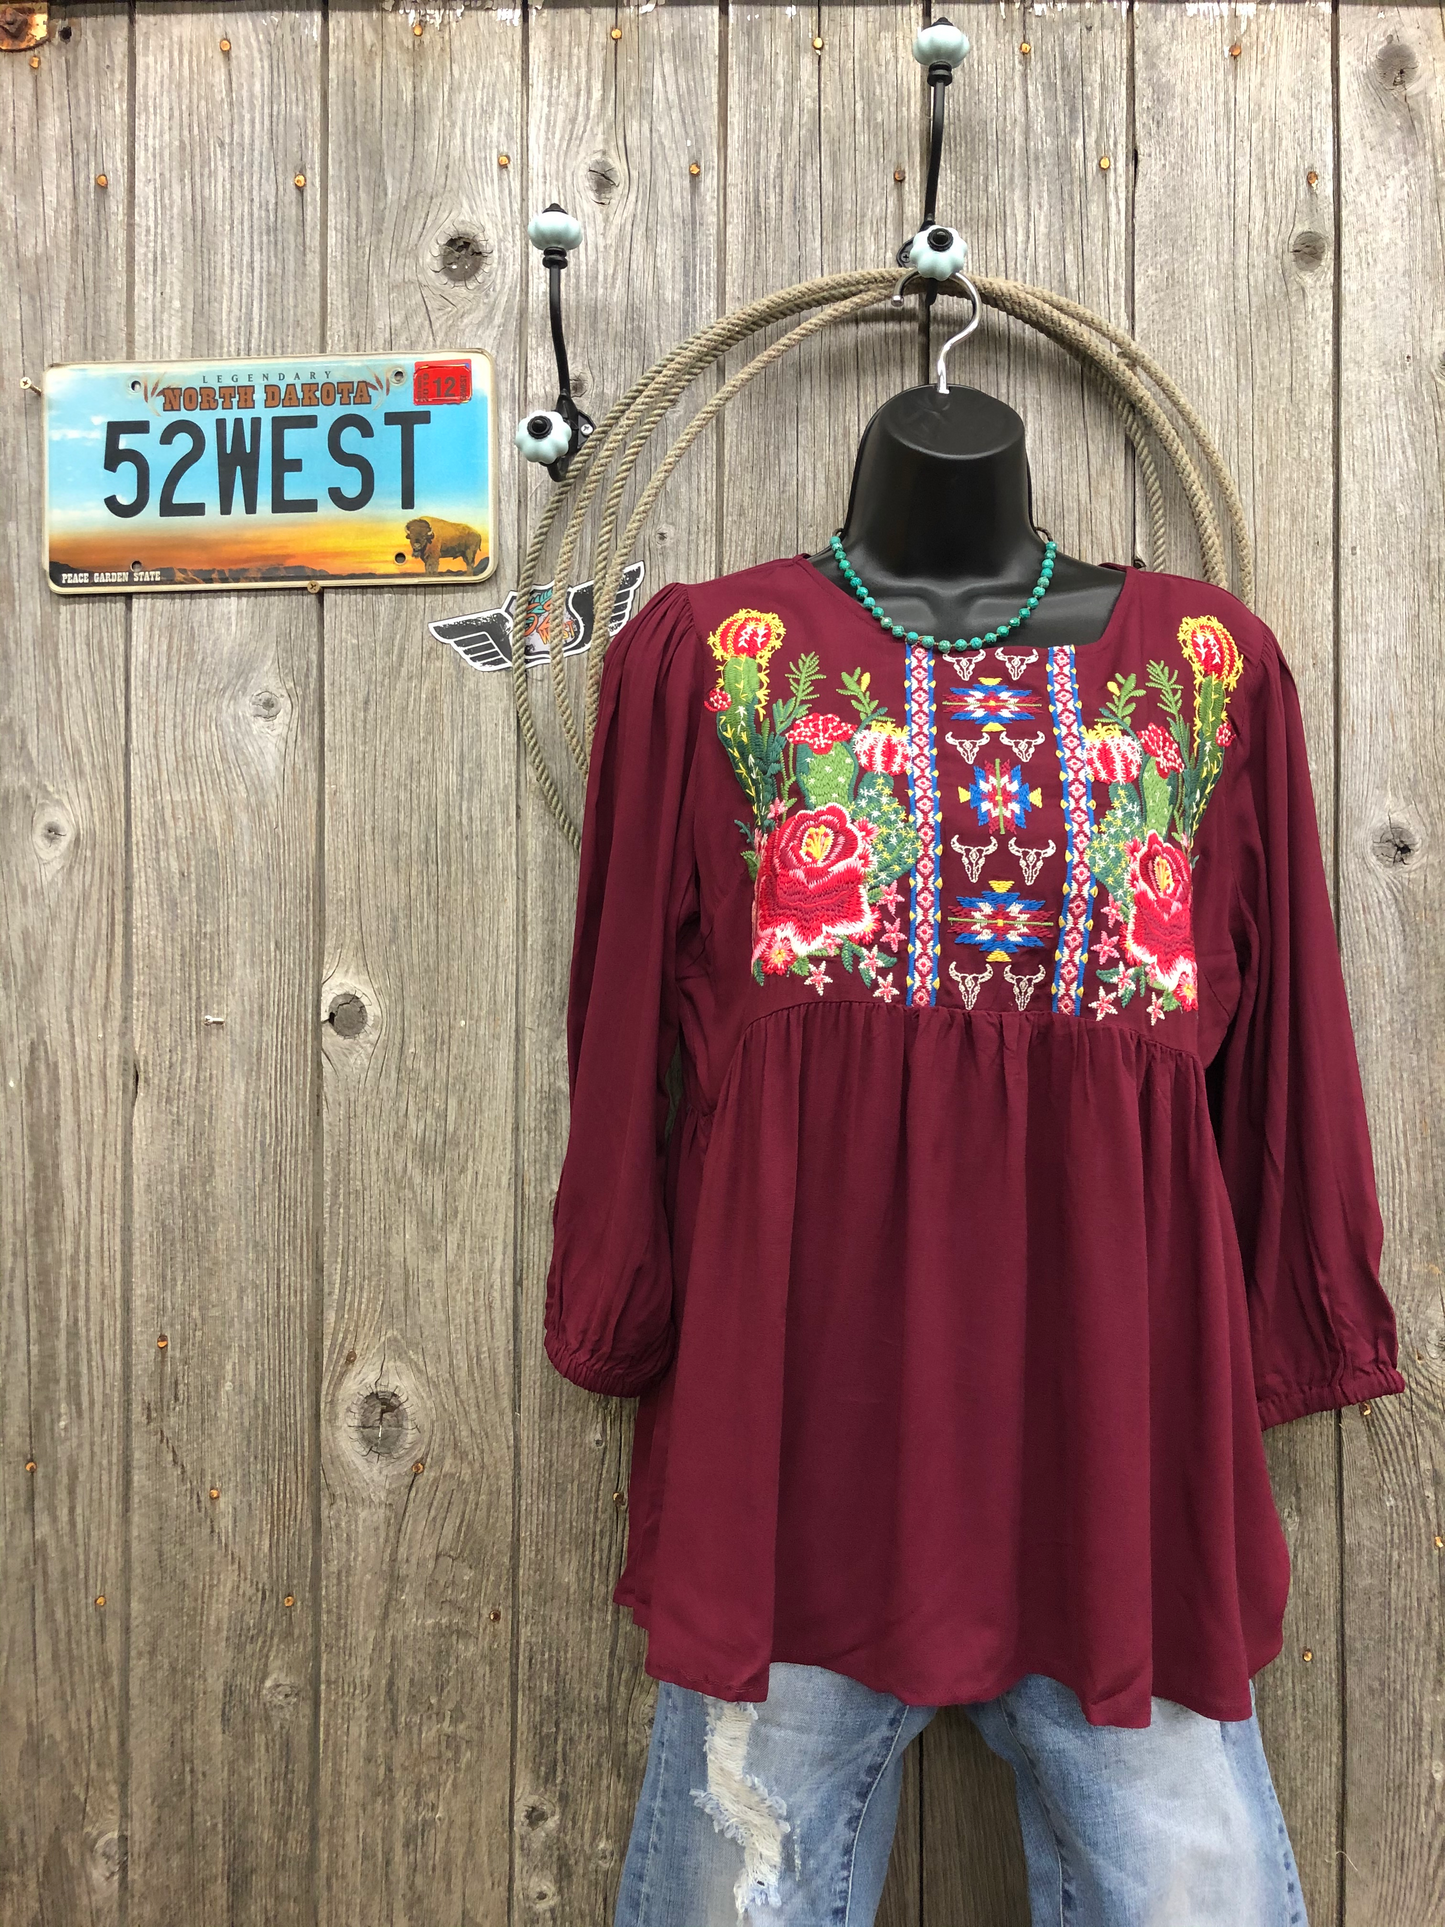 The Cali Embroidery Top